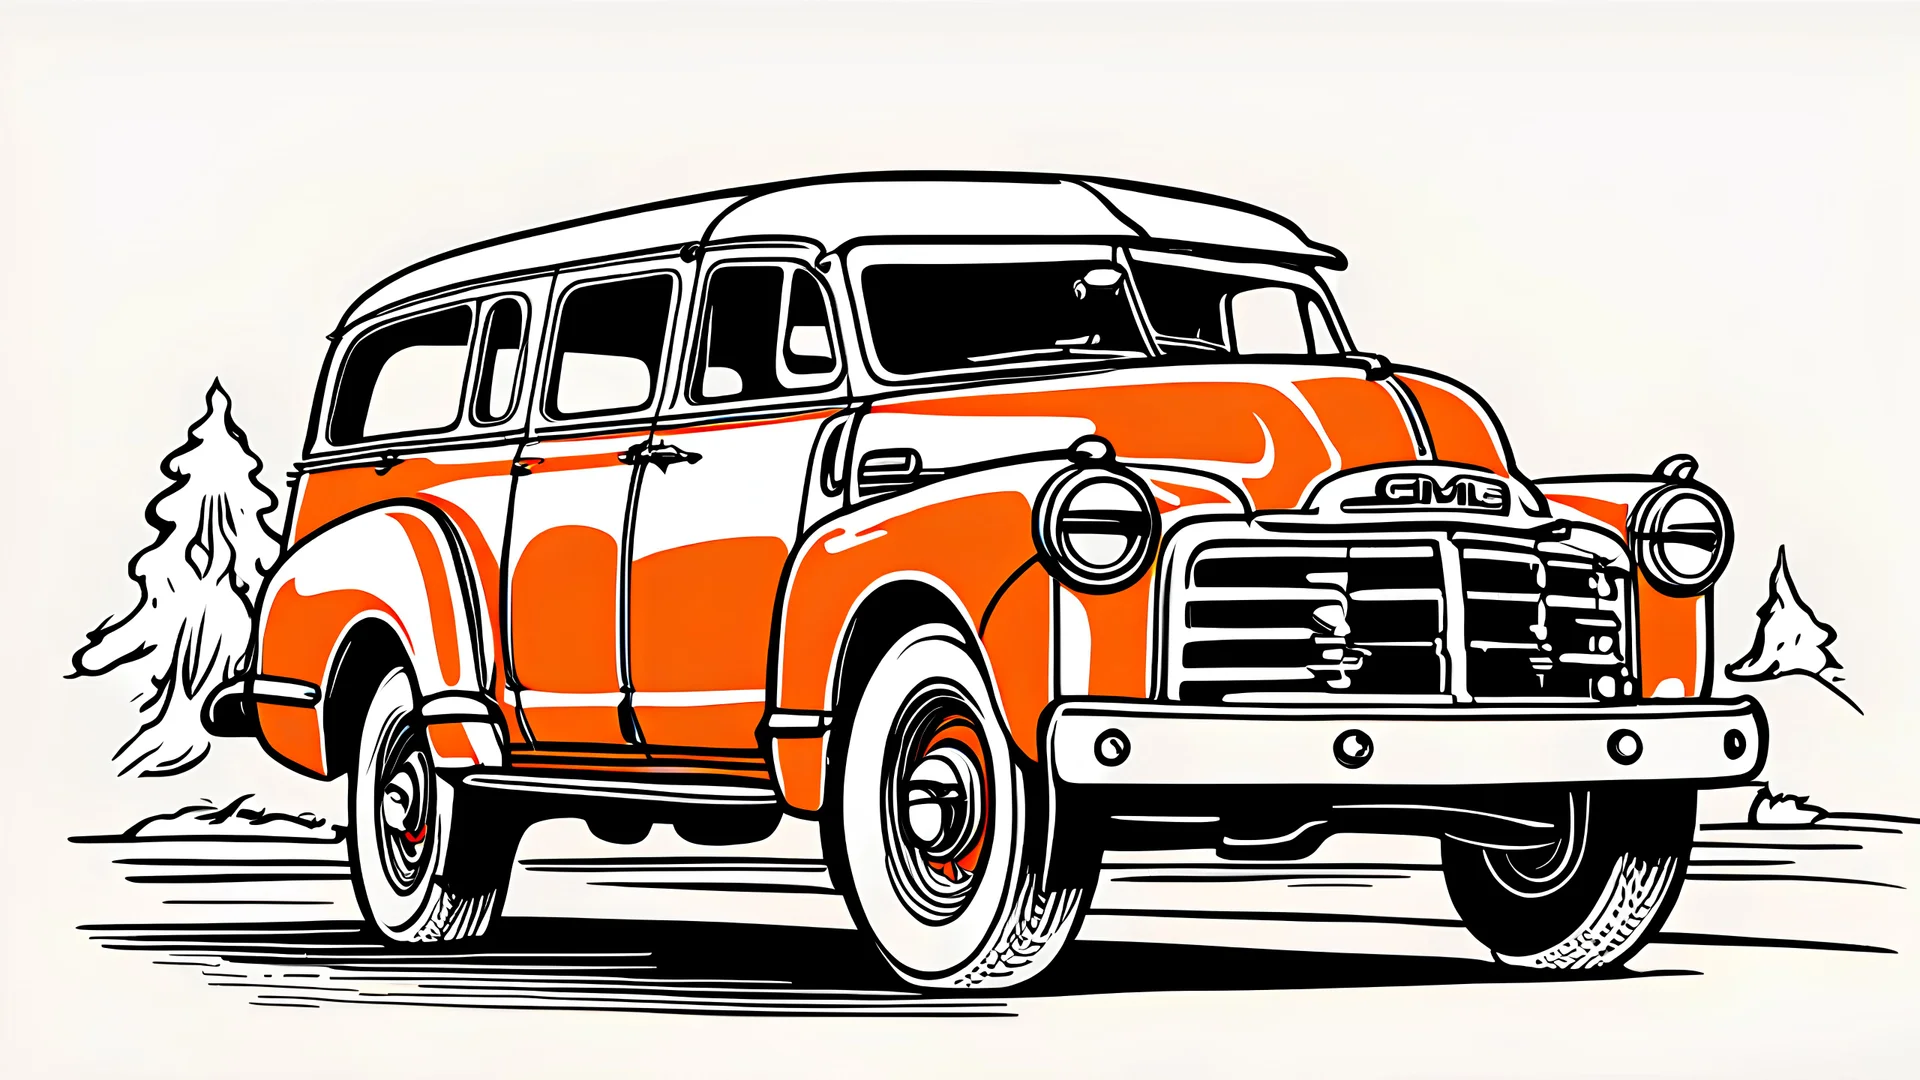 1952 GMC Suburban Carry All Wagon, long chasis, portrait in the style of a illustration drawing, simple line